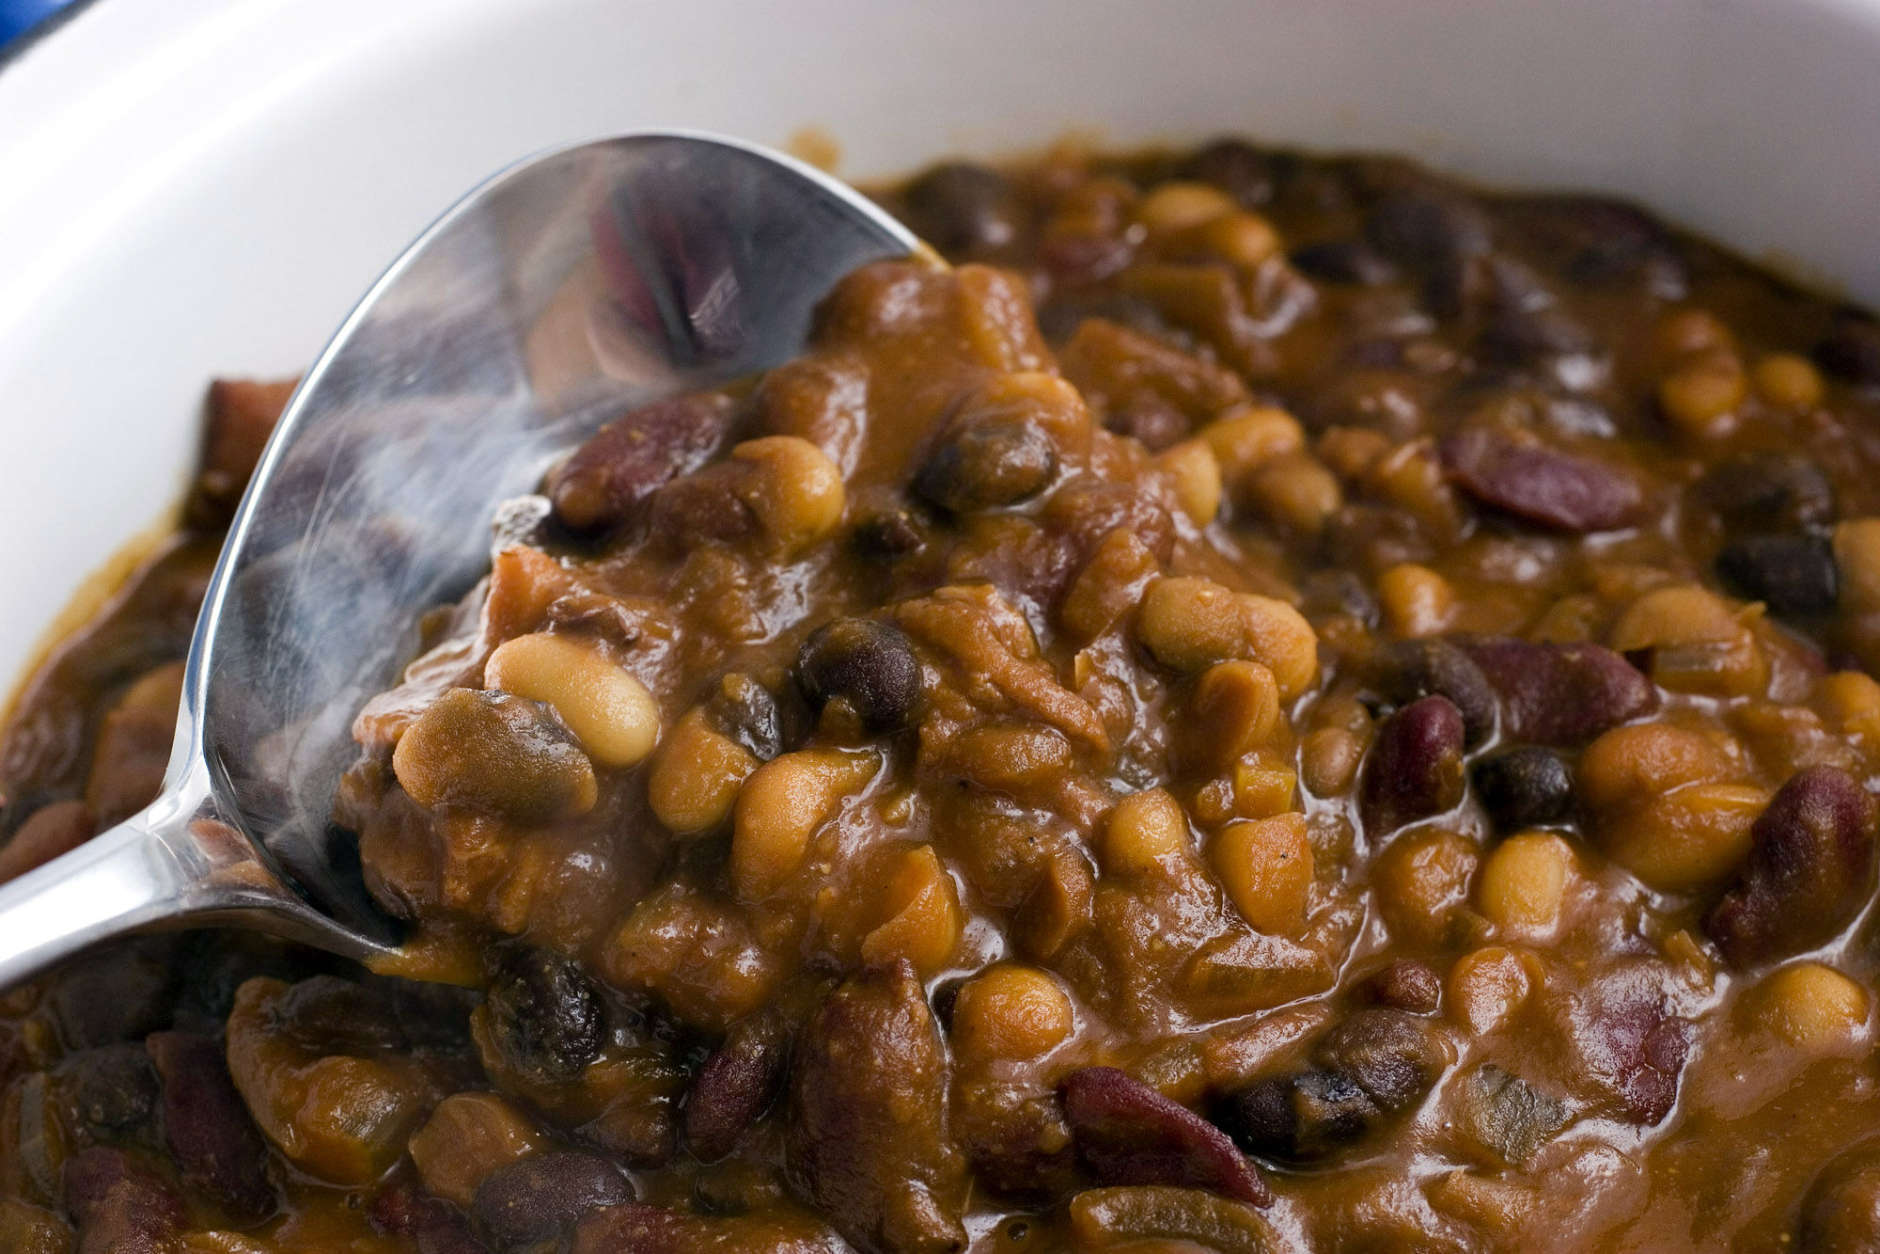 **FOR USE WITH AP LIFESTYLES**   Triple-bean Casserole is seen in this Sunday, March 2, 2008 photo.  This quick and colorful dish uses canned beans, a protein rich staple in any healthy pantry, that keep their nutrients during the canning process.   (AP Photo/Larry Crowe)